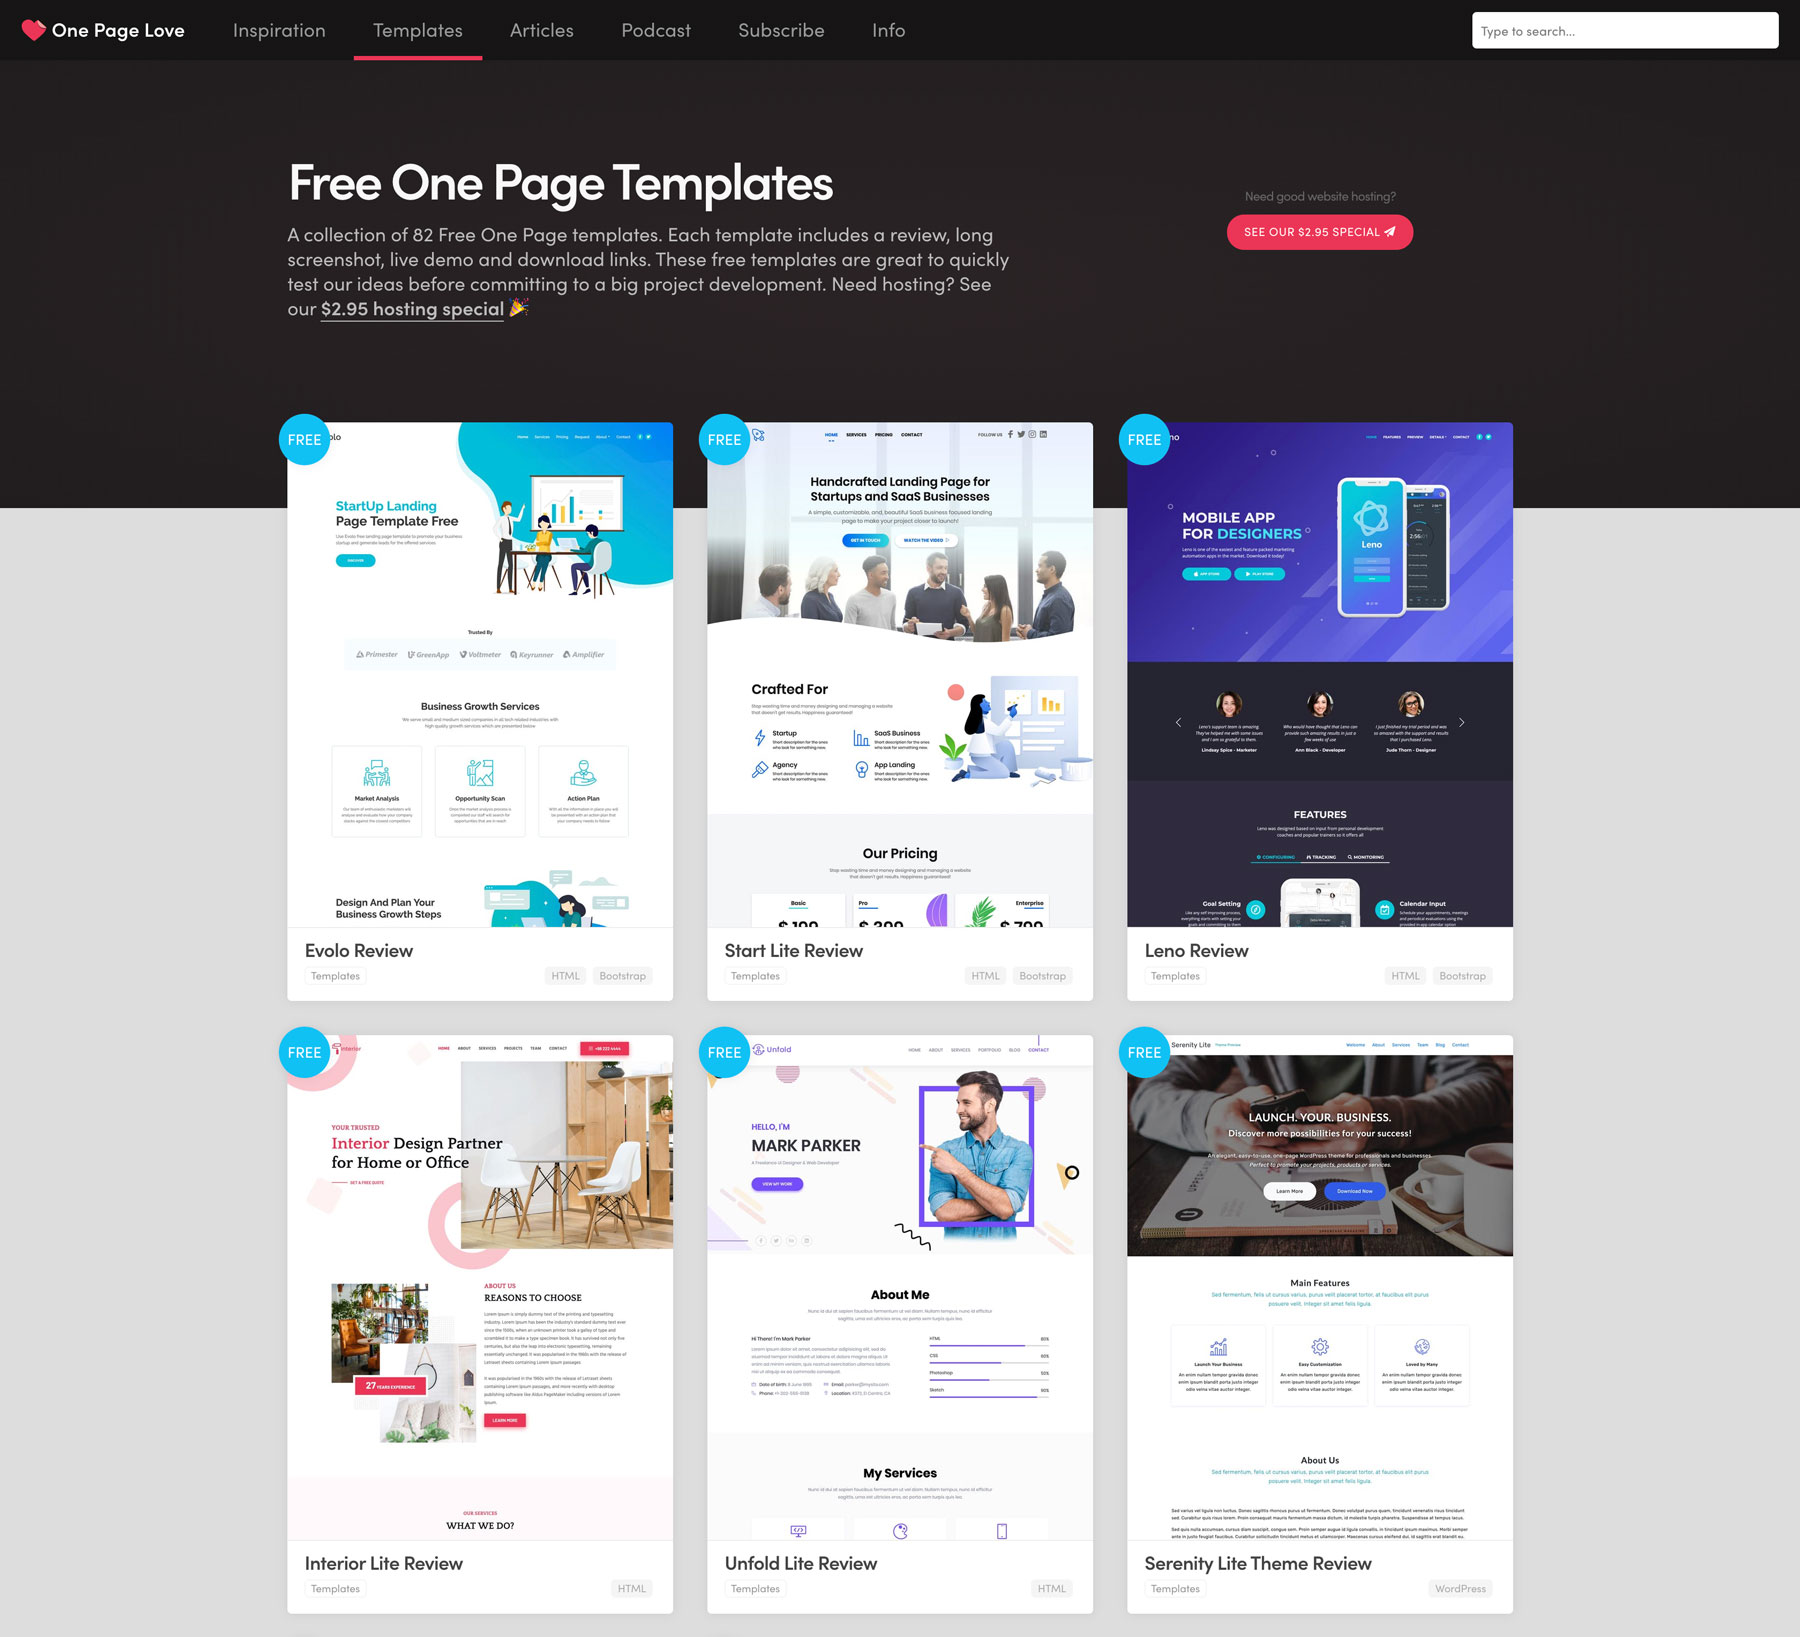 One Page Love Templates Screenshot